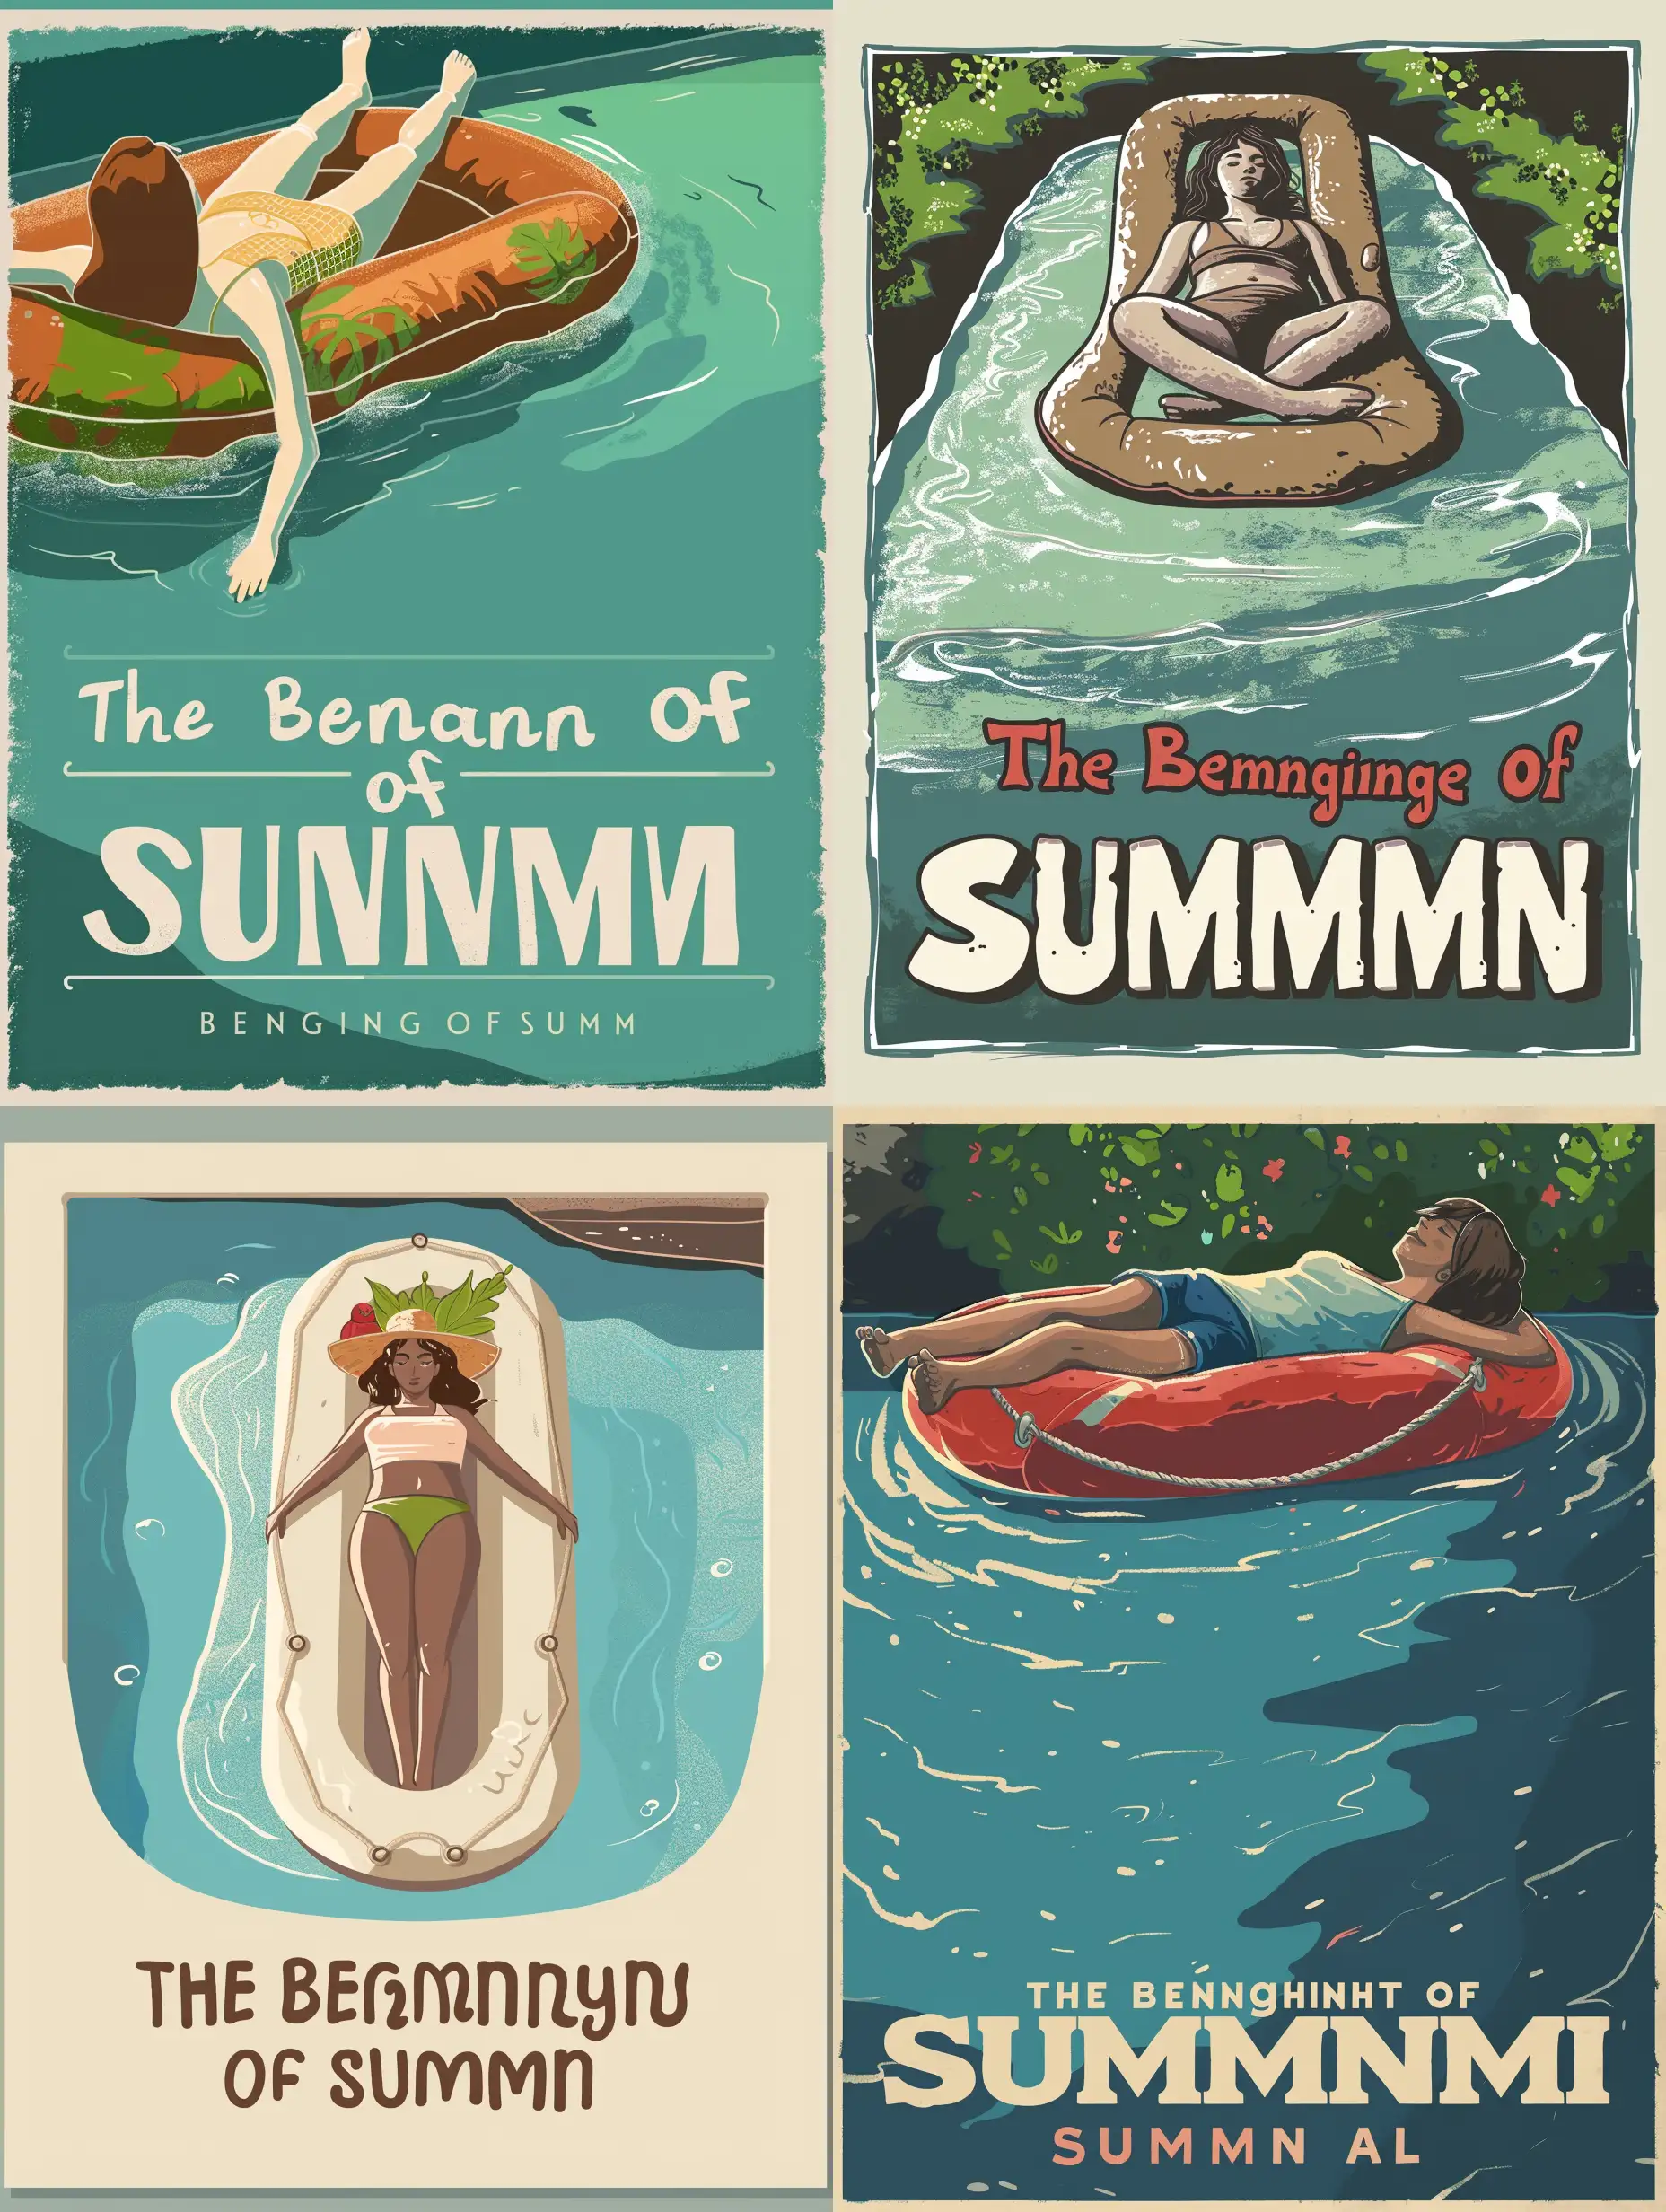 A poster of a woman laying on a raft in a pool, with the words "The Beginning of Summer" written below her. The woman is depicted in a cartoon style, and the pool is filled with water. The image conveys a sense of relaxation and leisure, as the woman enjoys her time in the pool.